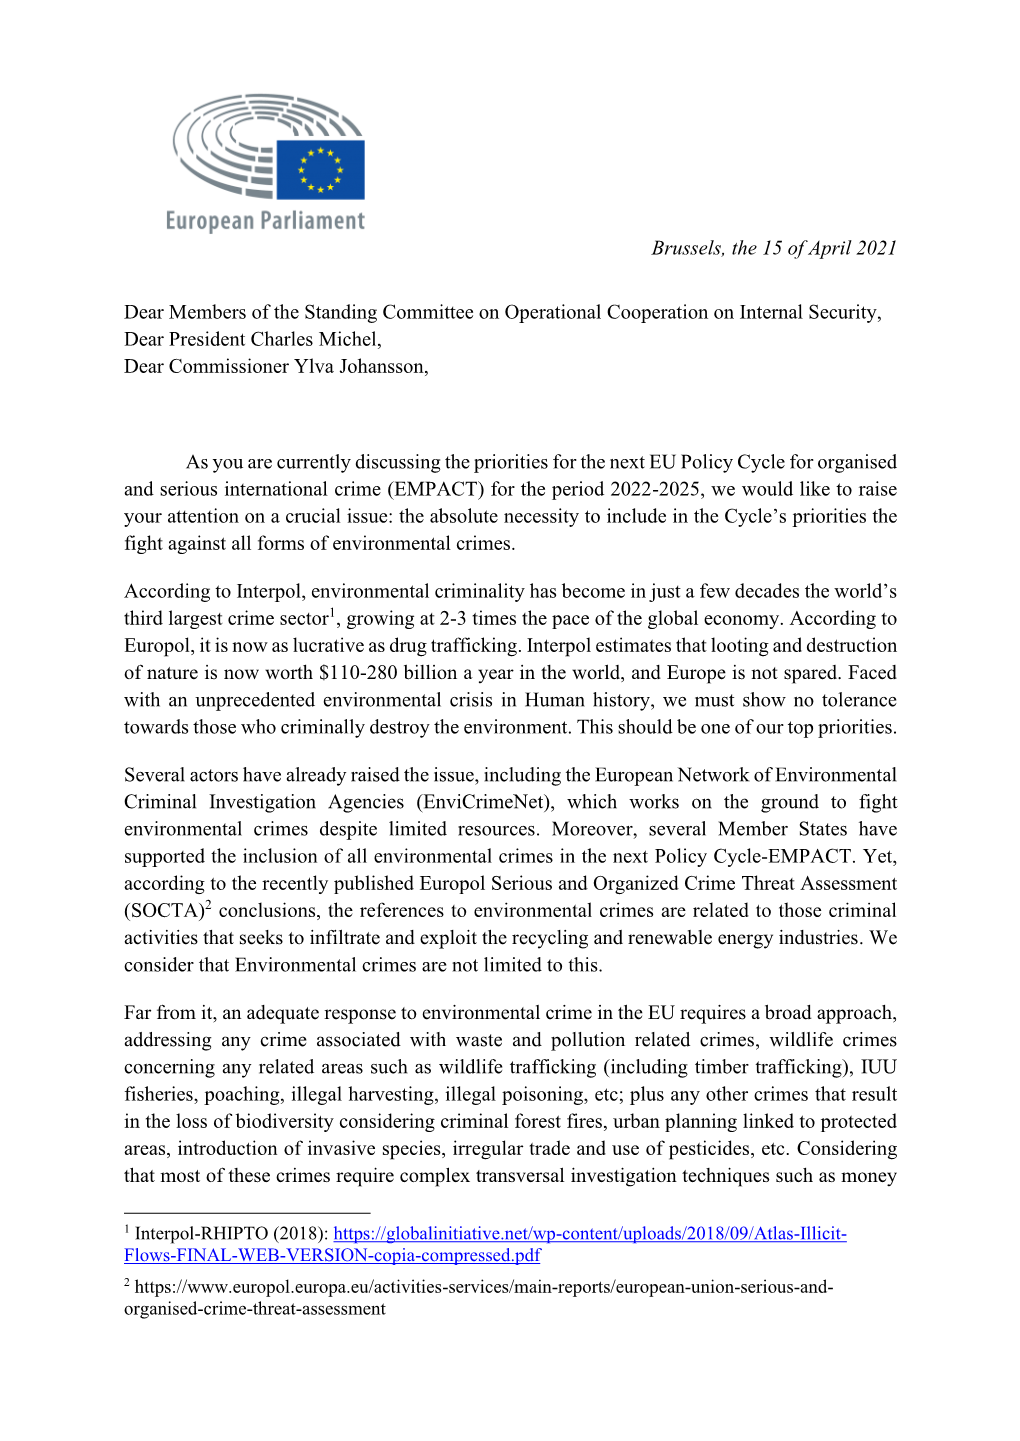 Meps and Ngos Letter on Including Wildlife Crime in the New EMPACT